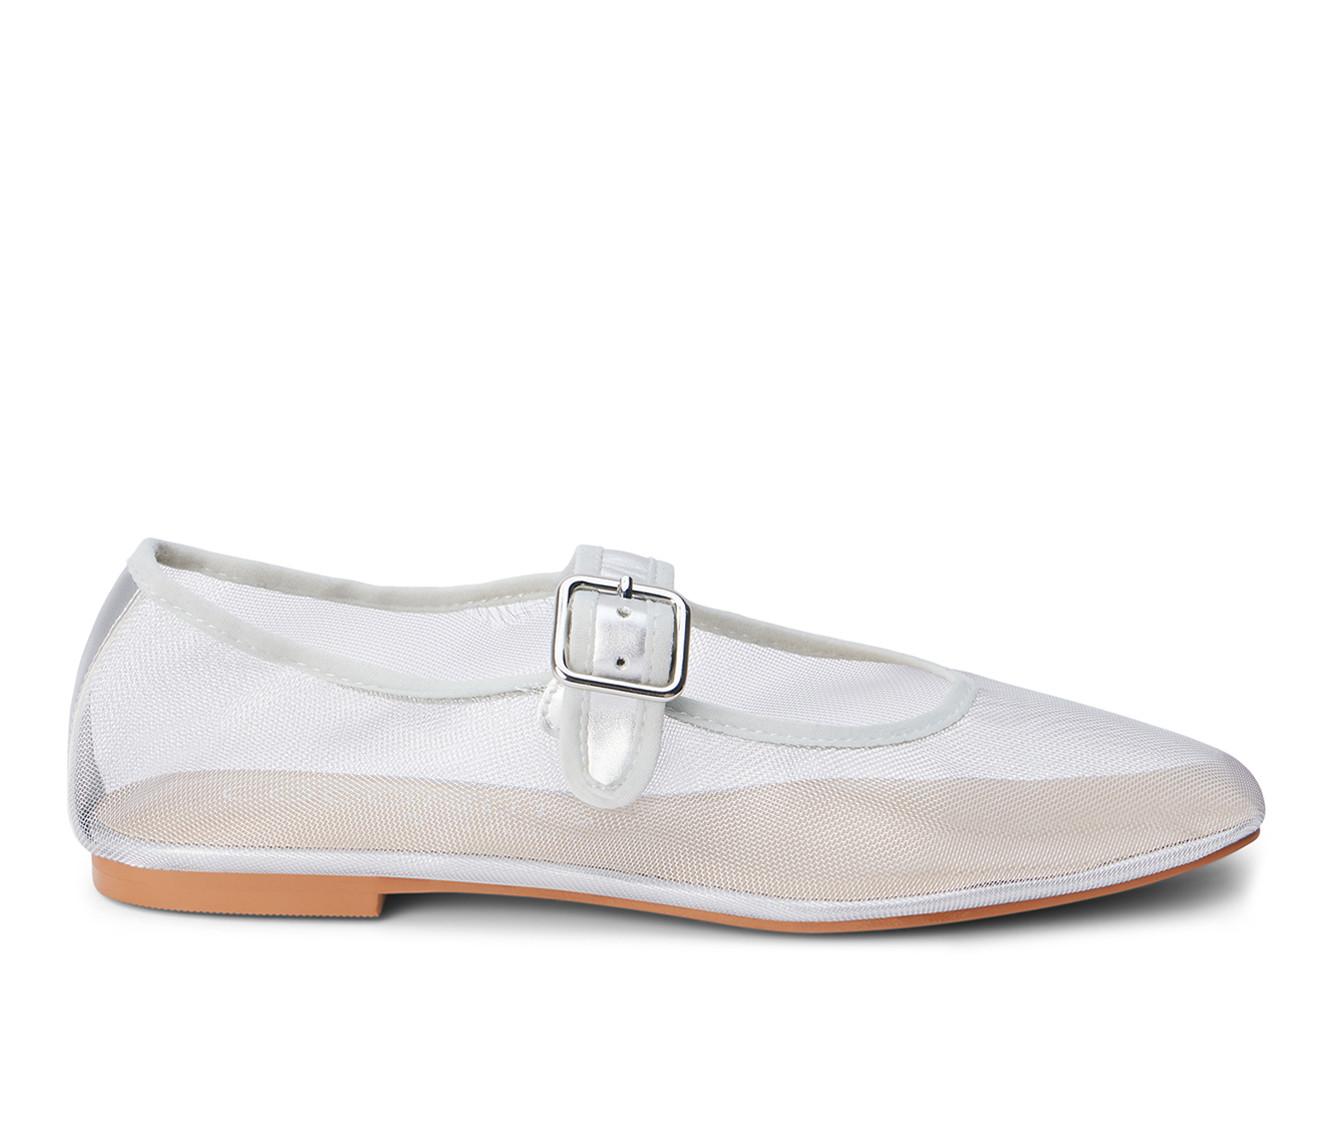 Women's Coconuts by Matisse Tribeca Mary Jane Flats